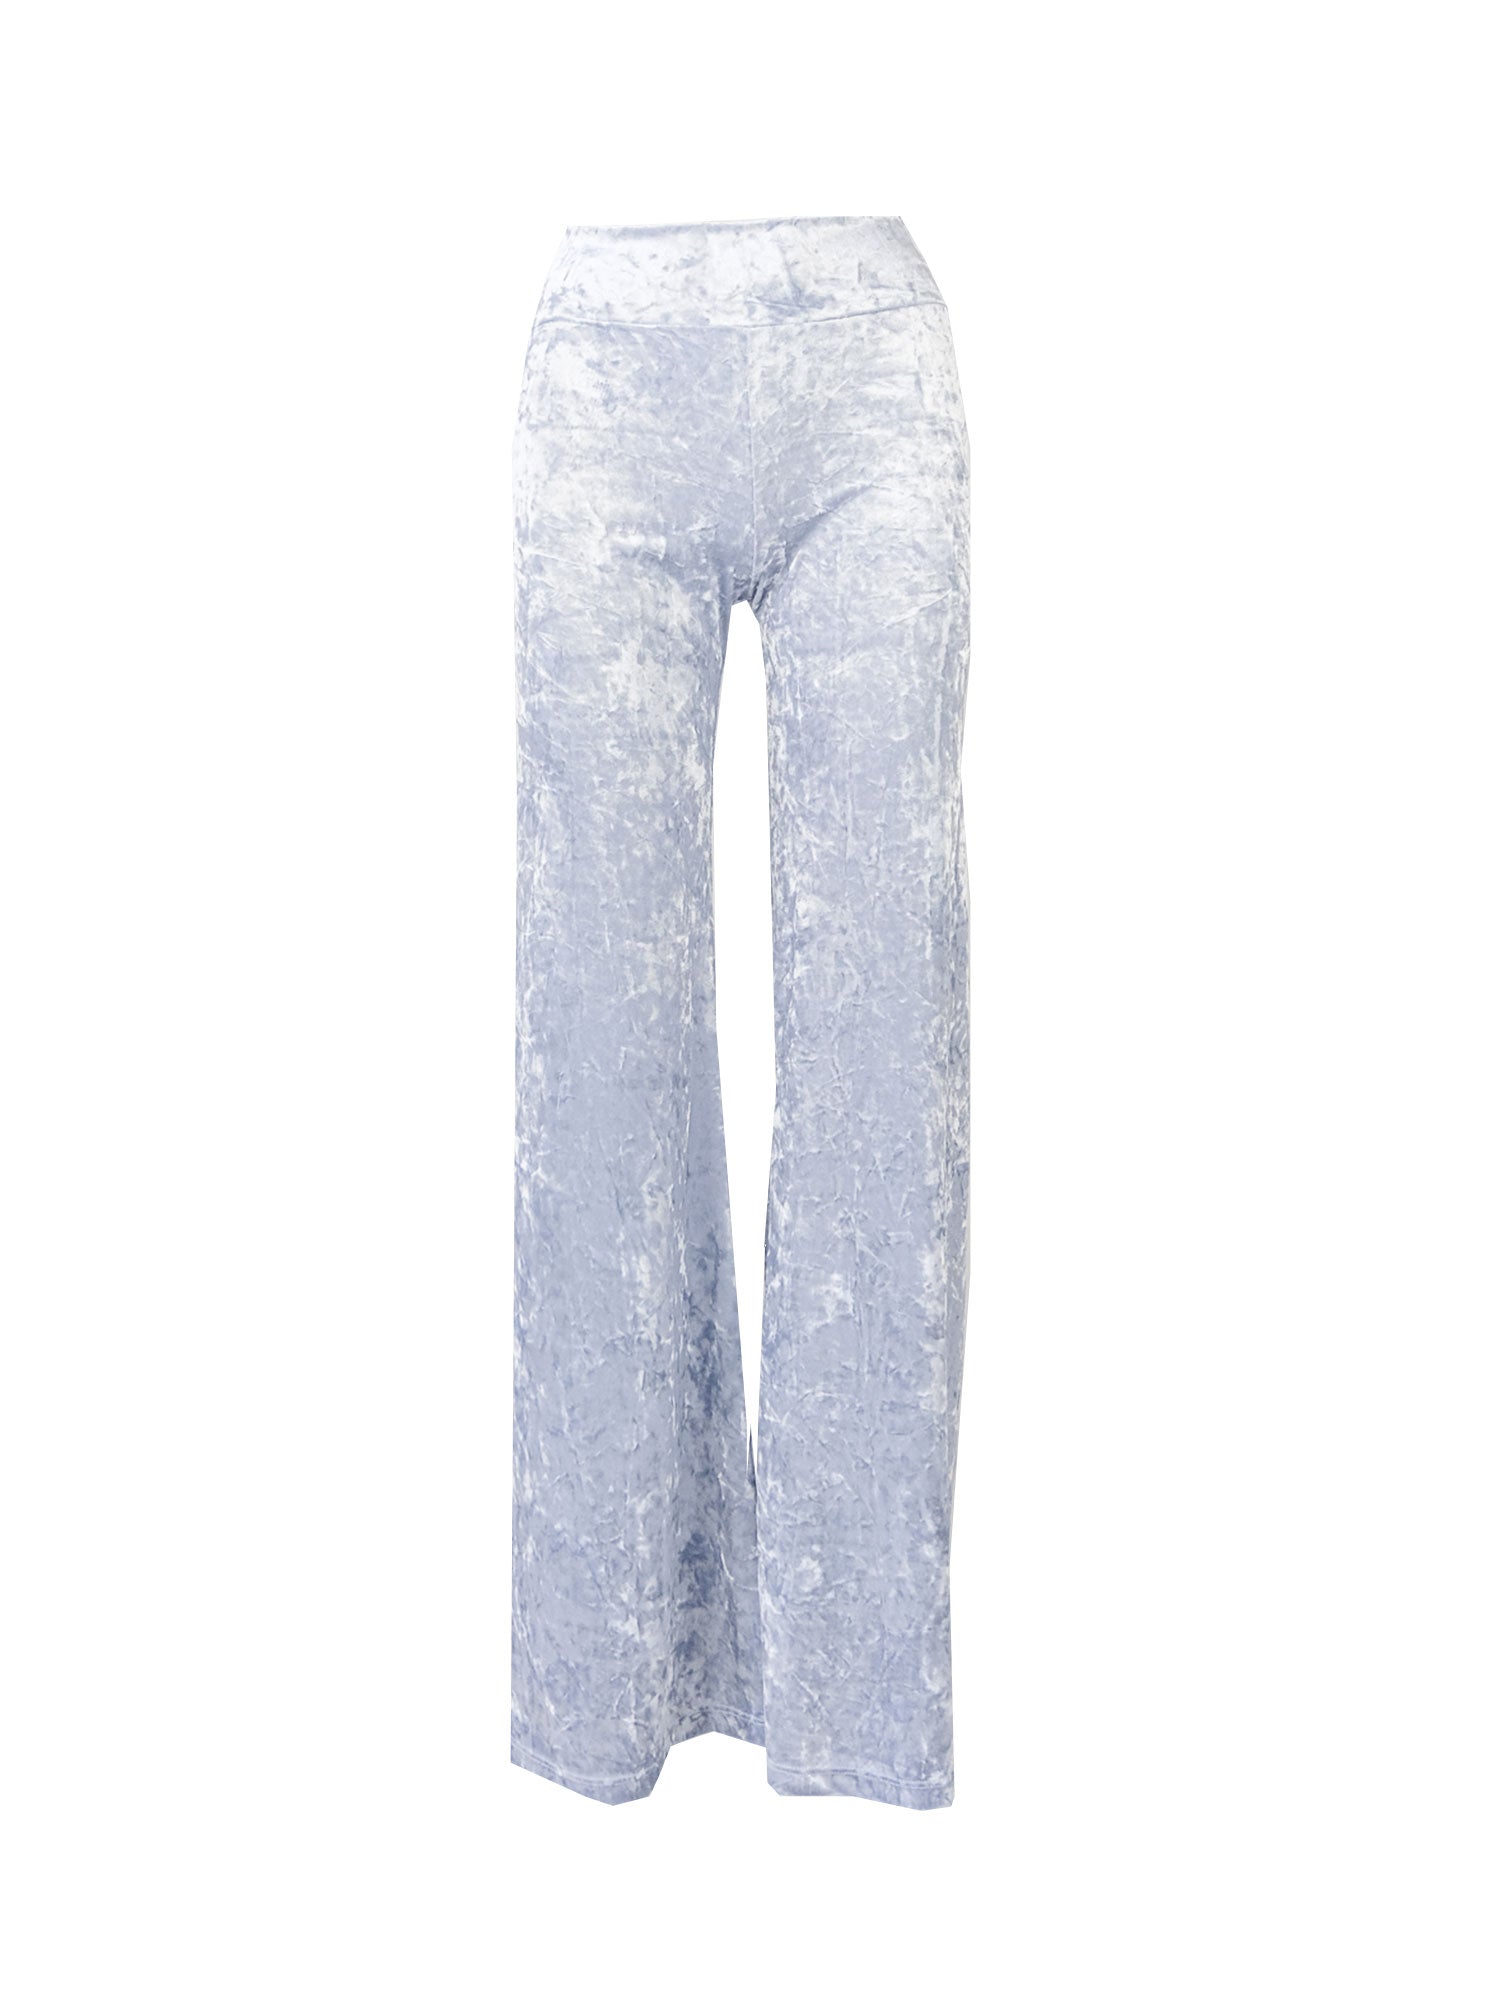 MIMI - trousers in light blue hammered chenille